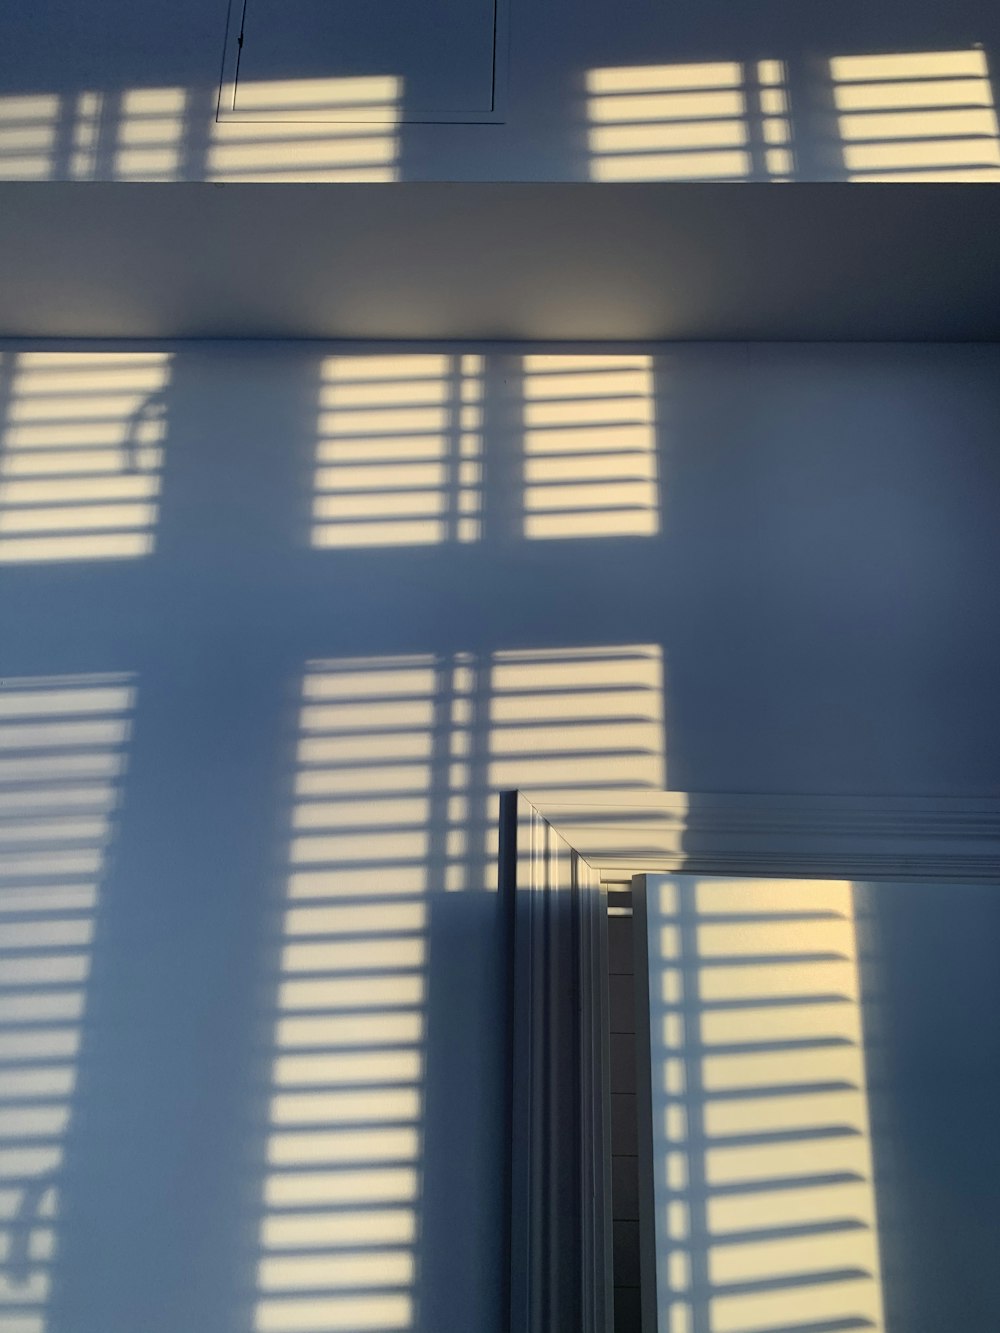 blue window blinds during daytime